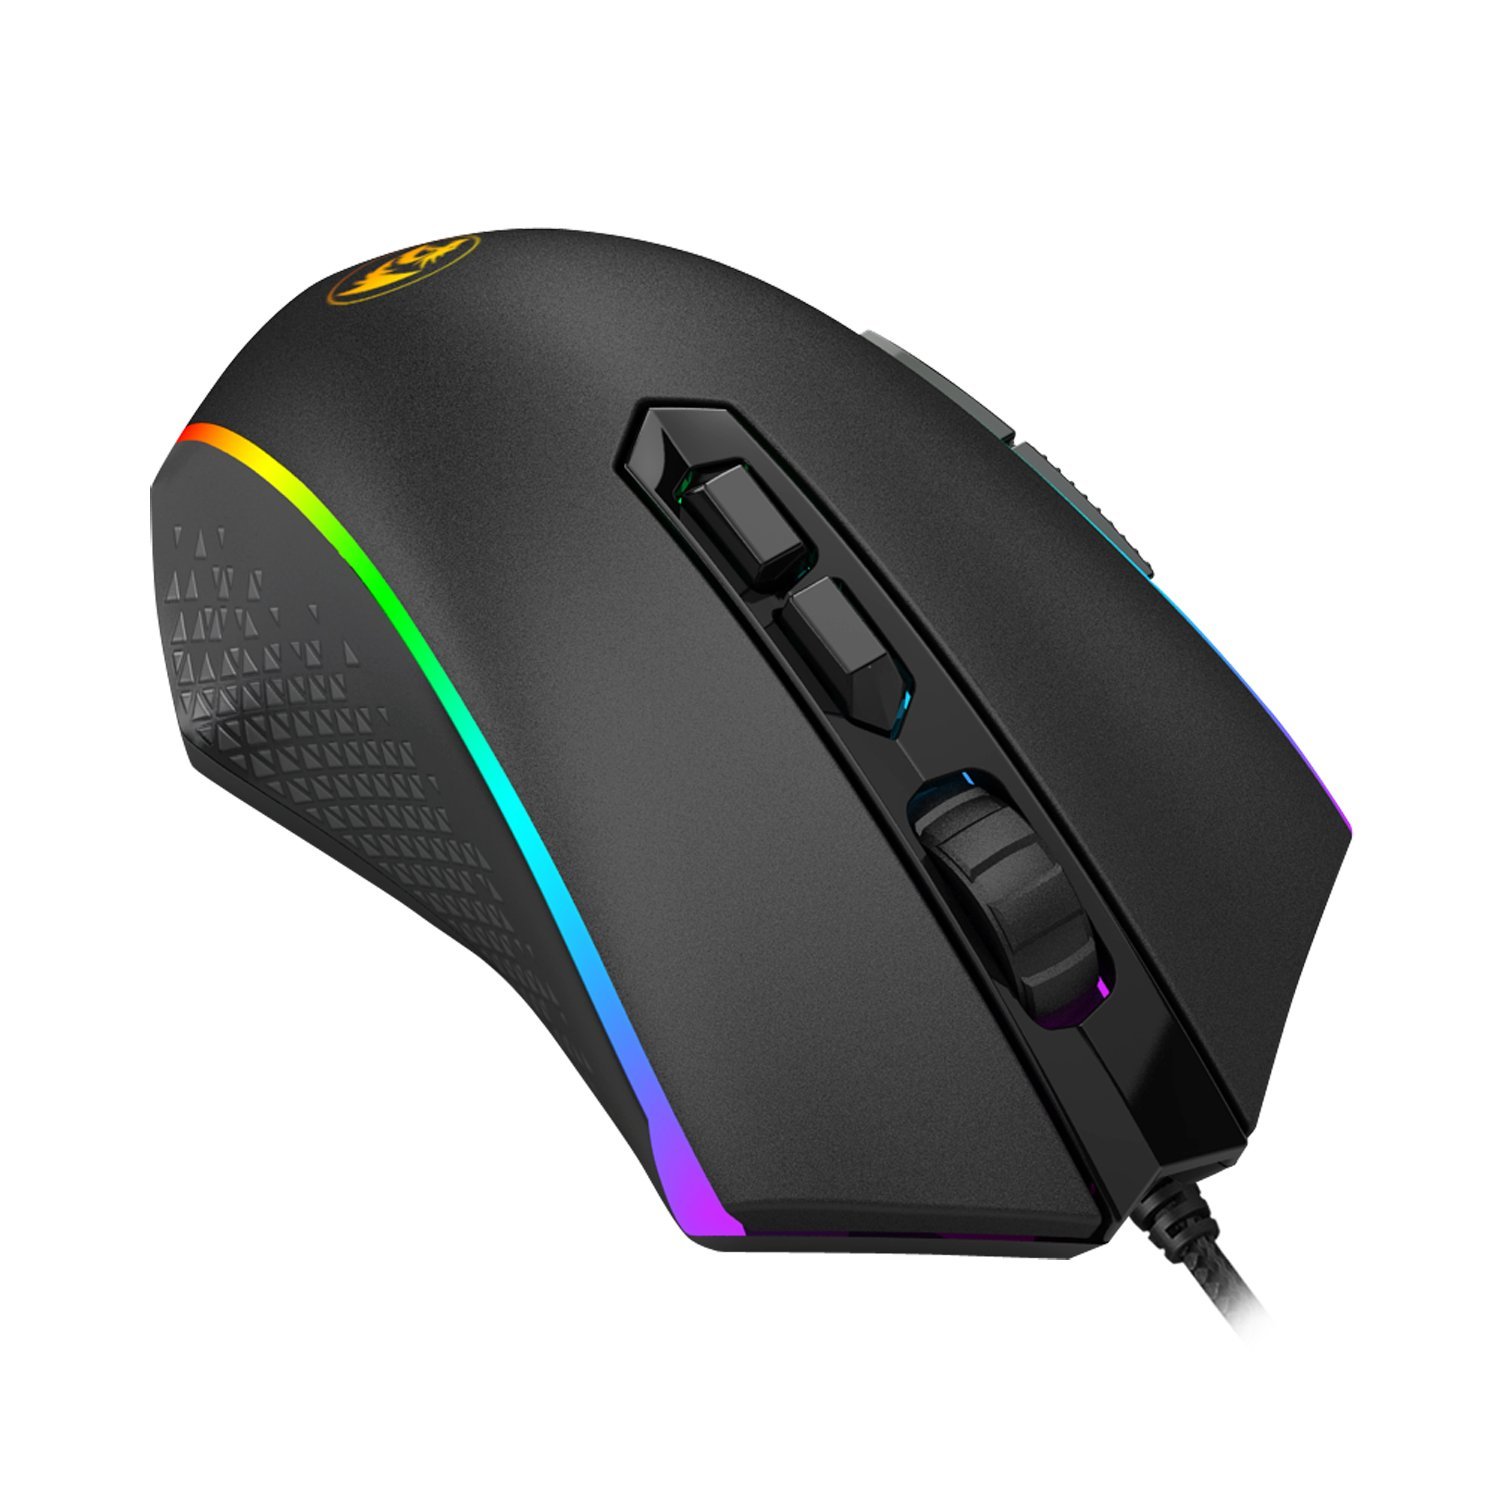 n M710 Gaming Mouse High-Precision Programmable RGB Backlight Modes Tuning Weights 10000 DPI for PC Laptop Mouse Gamer